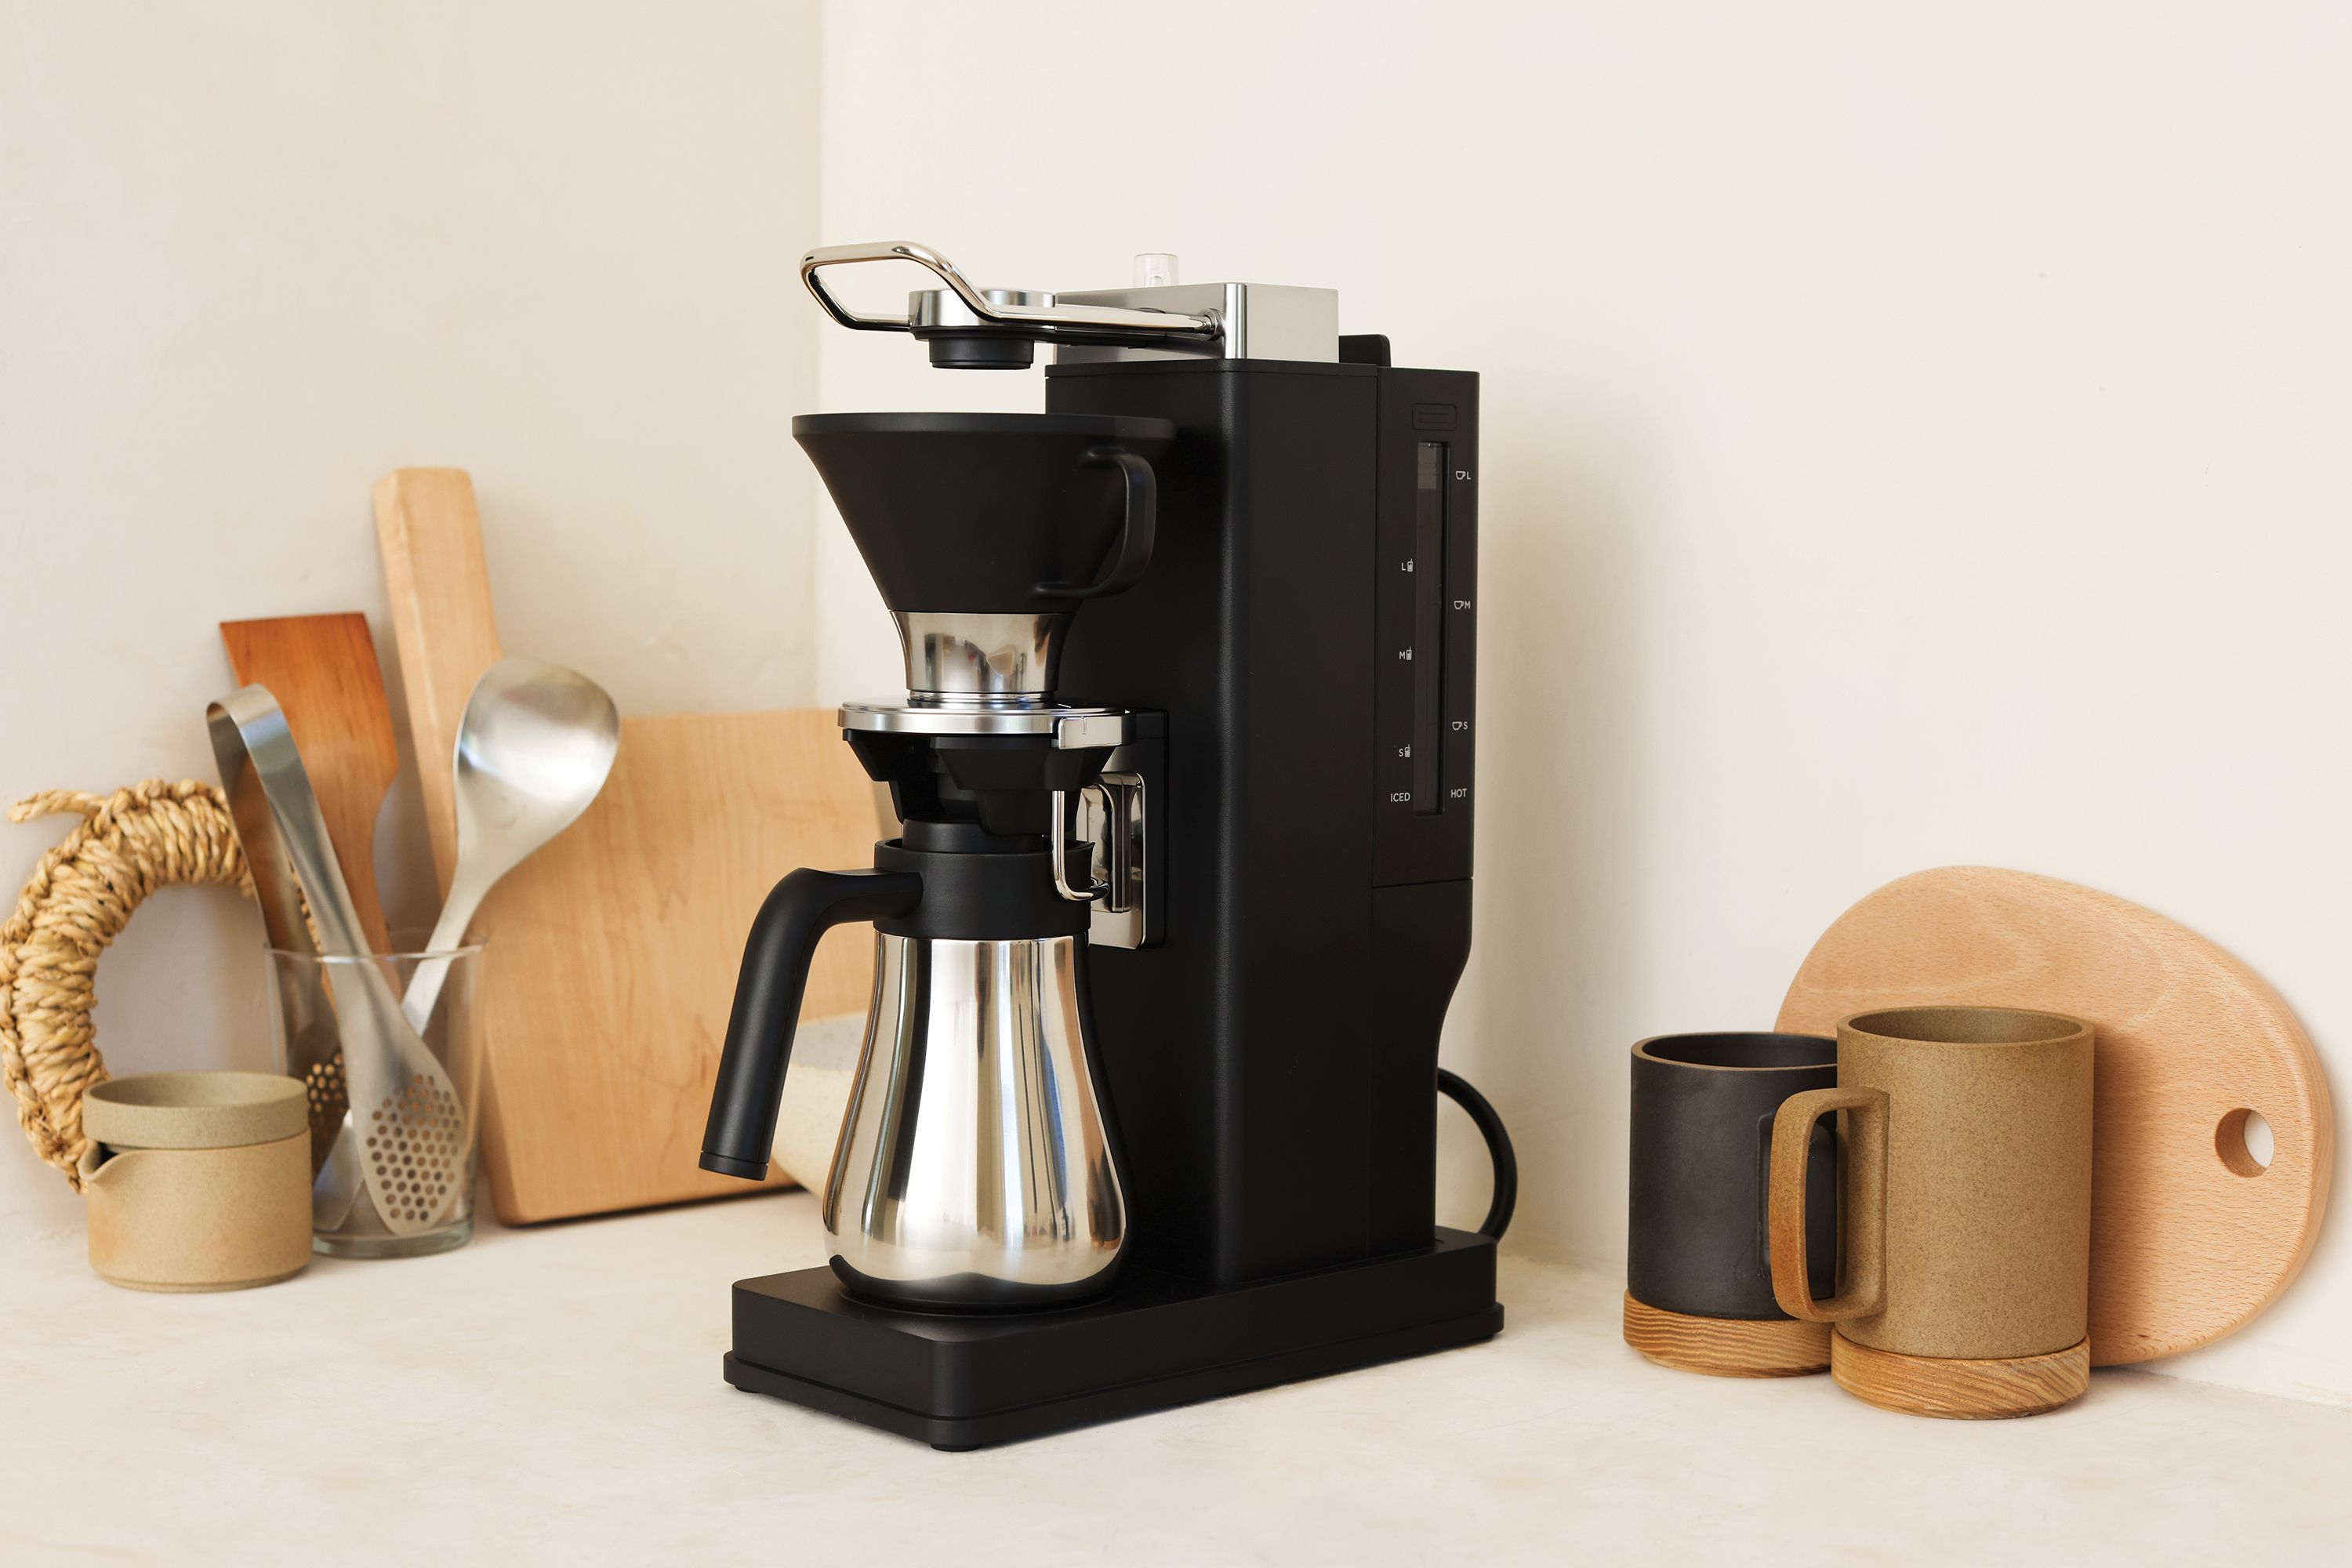 Ratio Eight Coffee Maker Review: A Near-Perfect Chemex-Style Pot